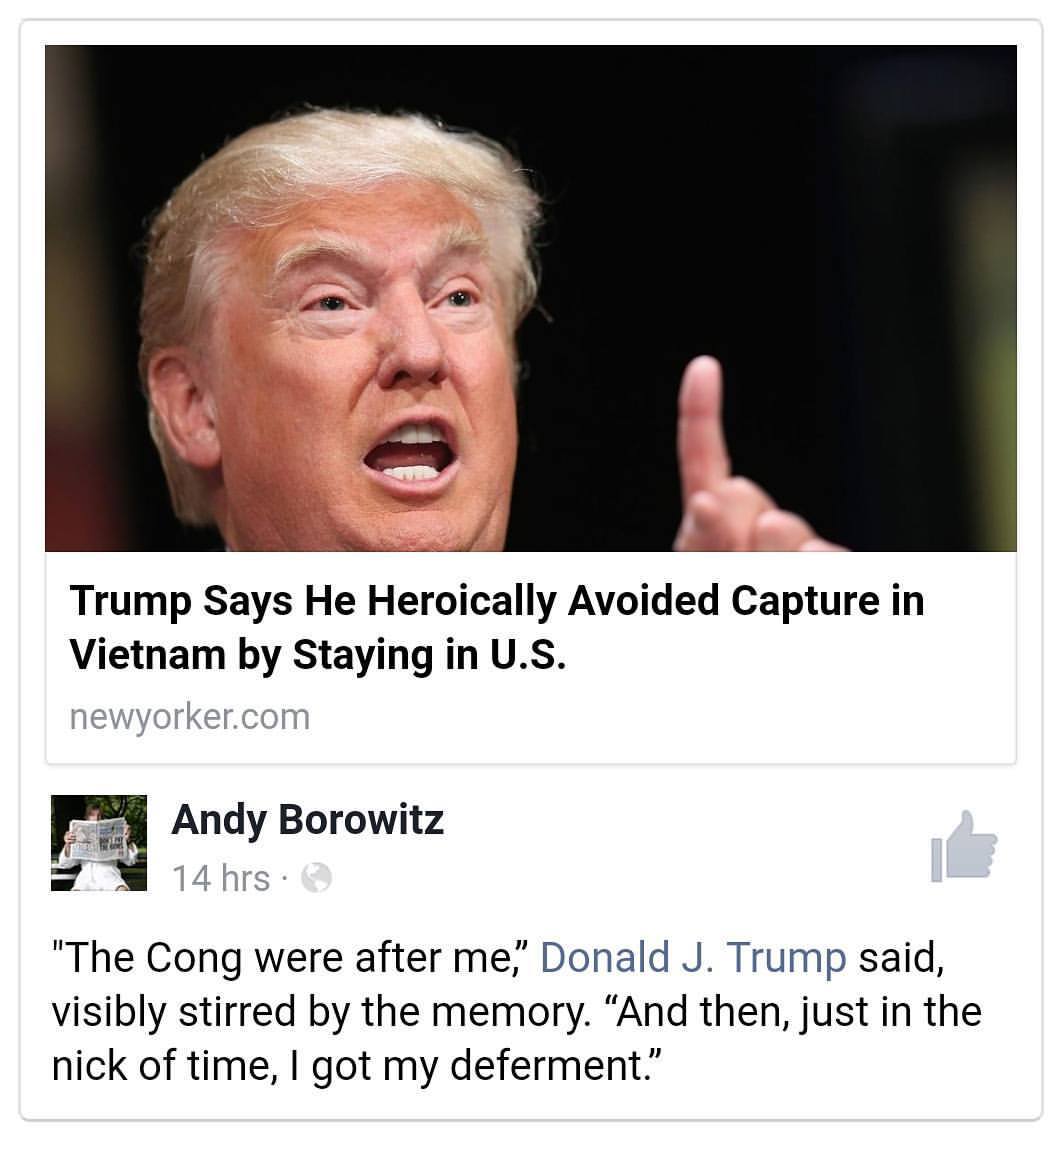 photo caption - Trump Says He Heroically Avoided Capture in Vietnam by Staying in U.S. newyorker.com Andy Borowitz 14 hrs. "The Cong were after me," Donald J. Trump said, visibly stirred by the memory. "And then, just in the nick of time, I got my deferme